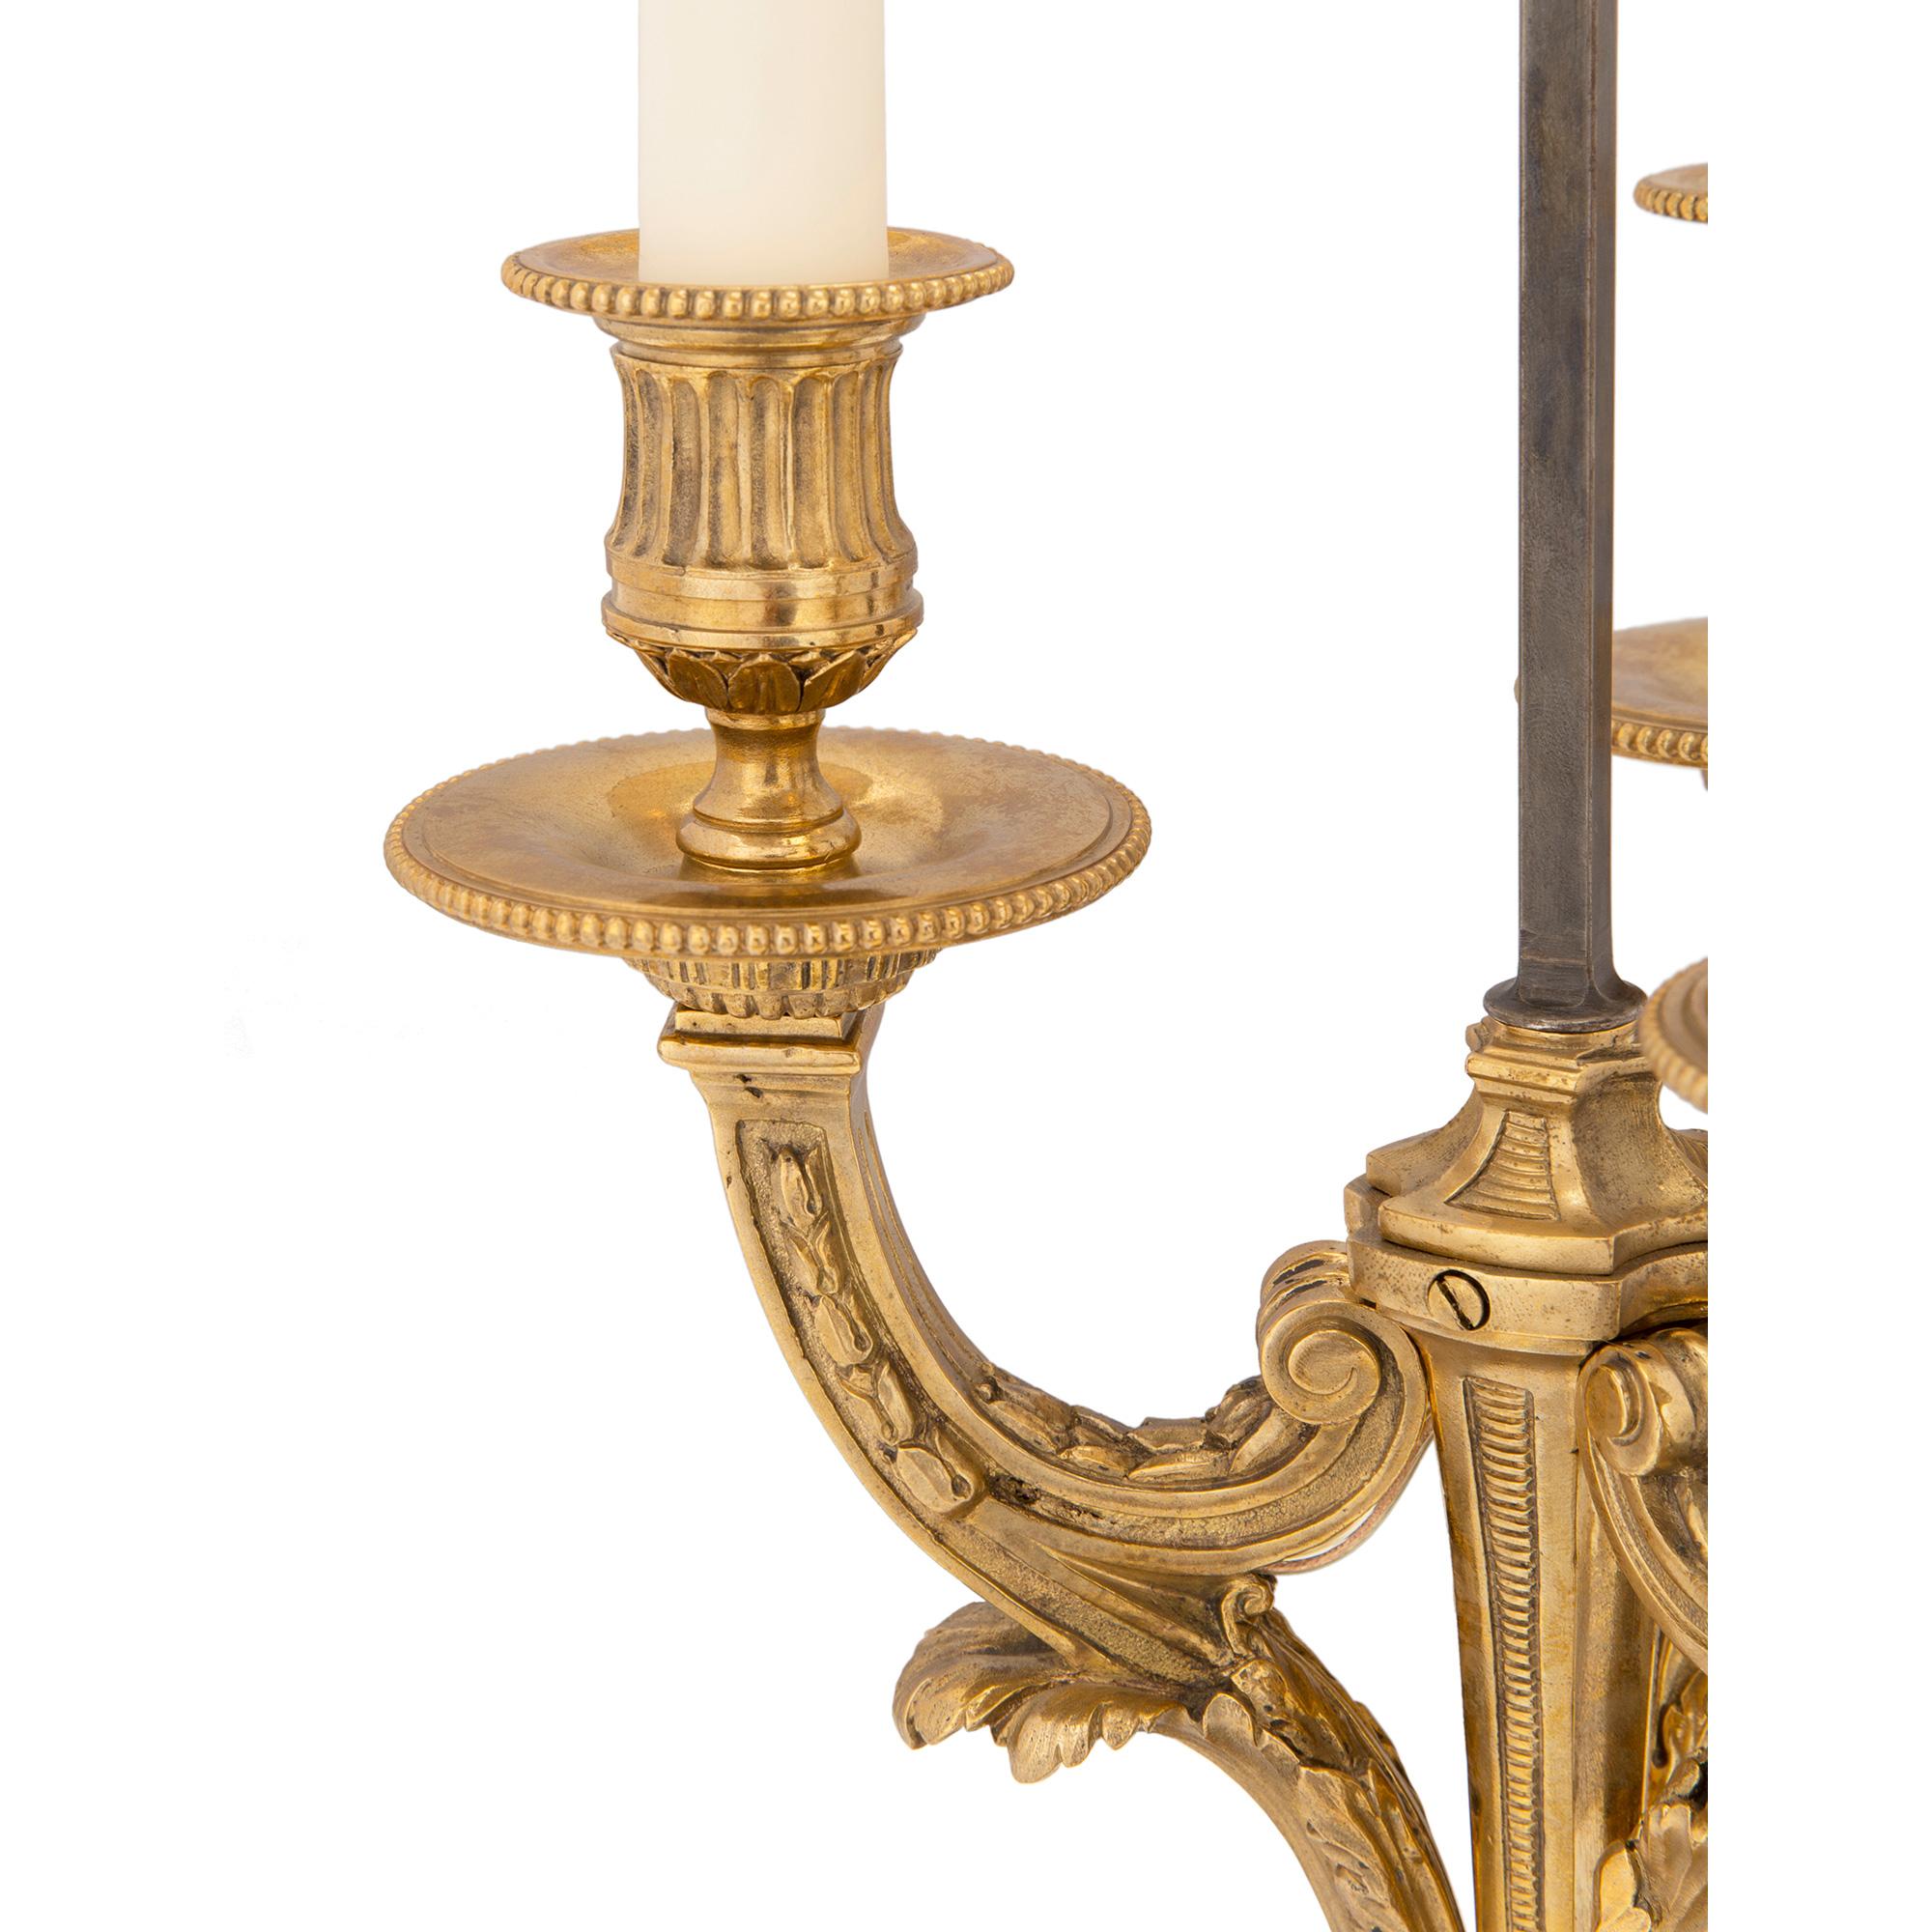 Pair of French Mid-19th Century Louis XVI Style Ormolu Bouilotte Lamps For Sale 2